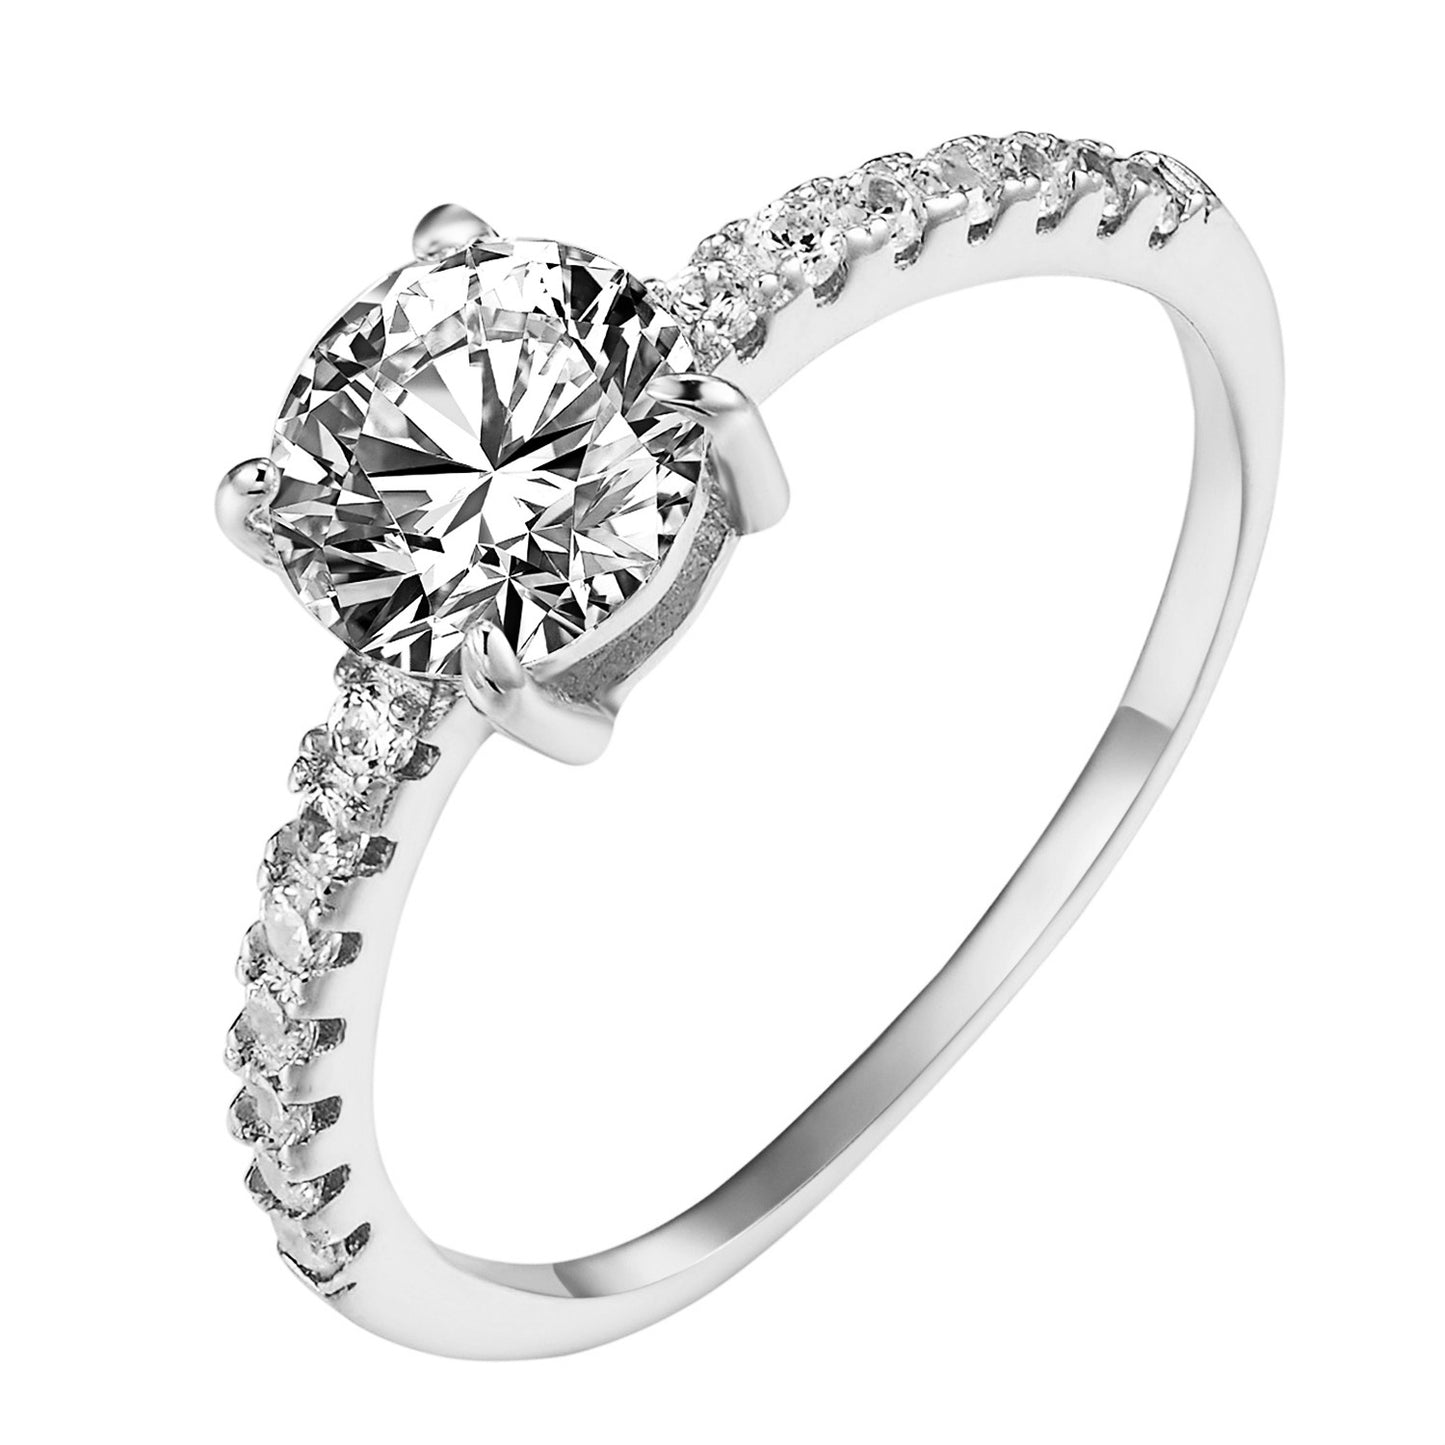 Solitaire Round Cut Engagement Ring Sterling Silver Wedding Ladies Cubic Zircon